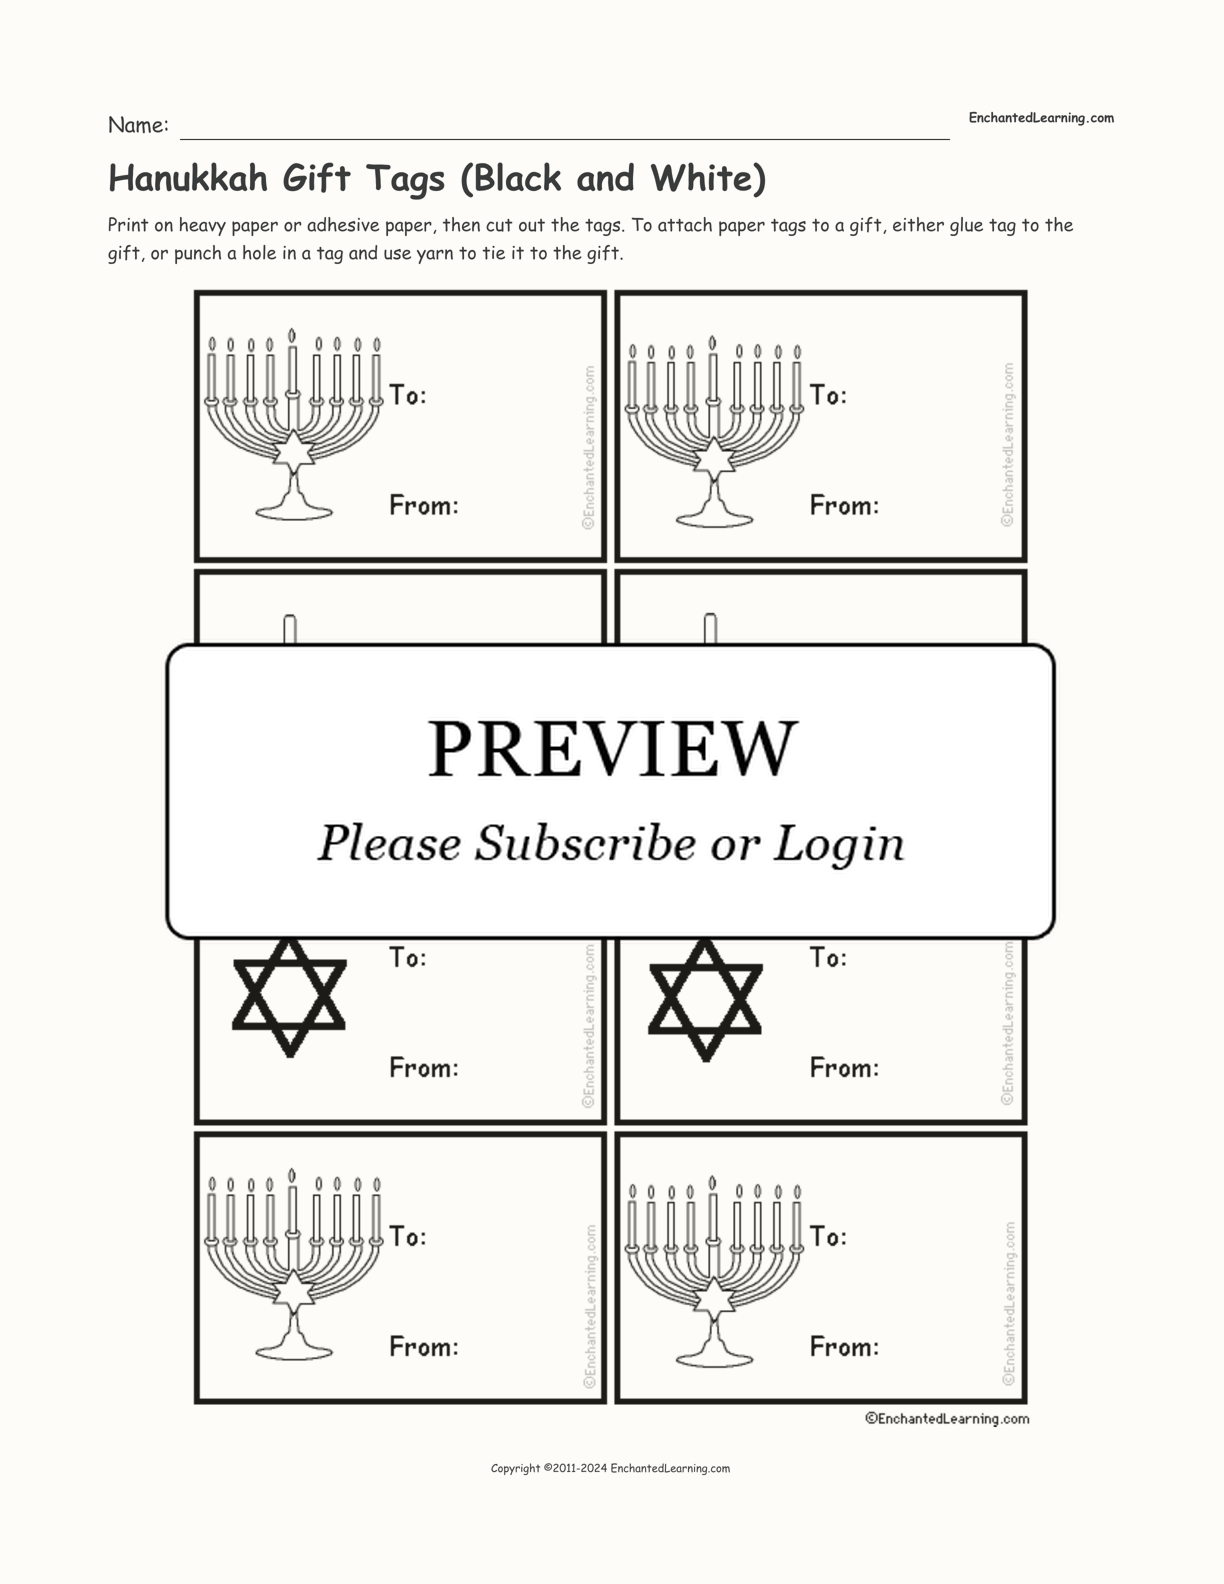 Hanukkah Gift Tags (Black and White) interactive printout page 1